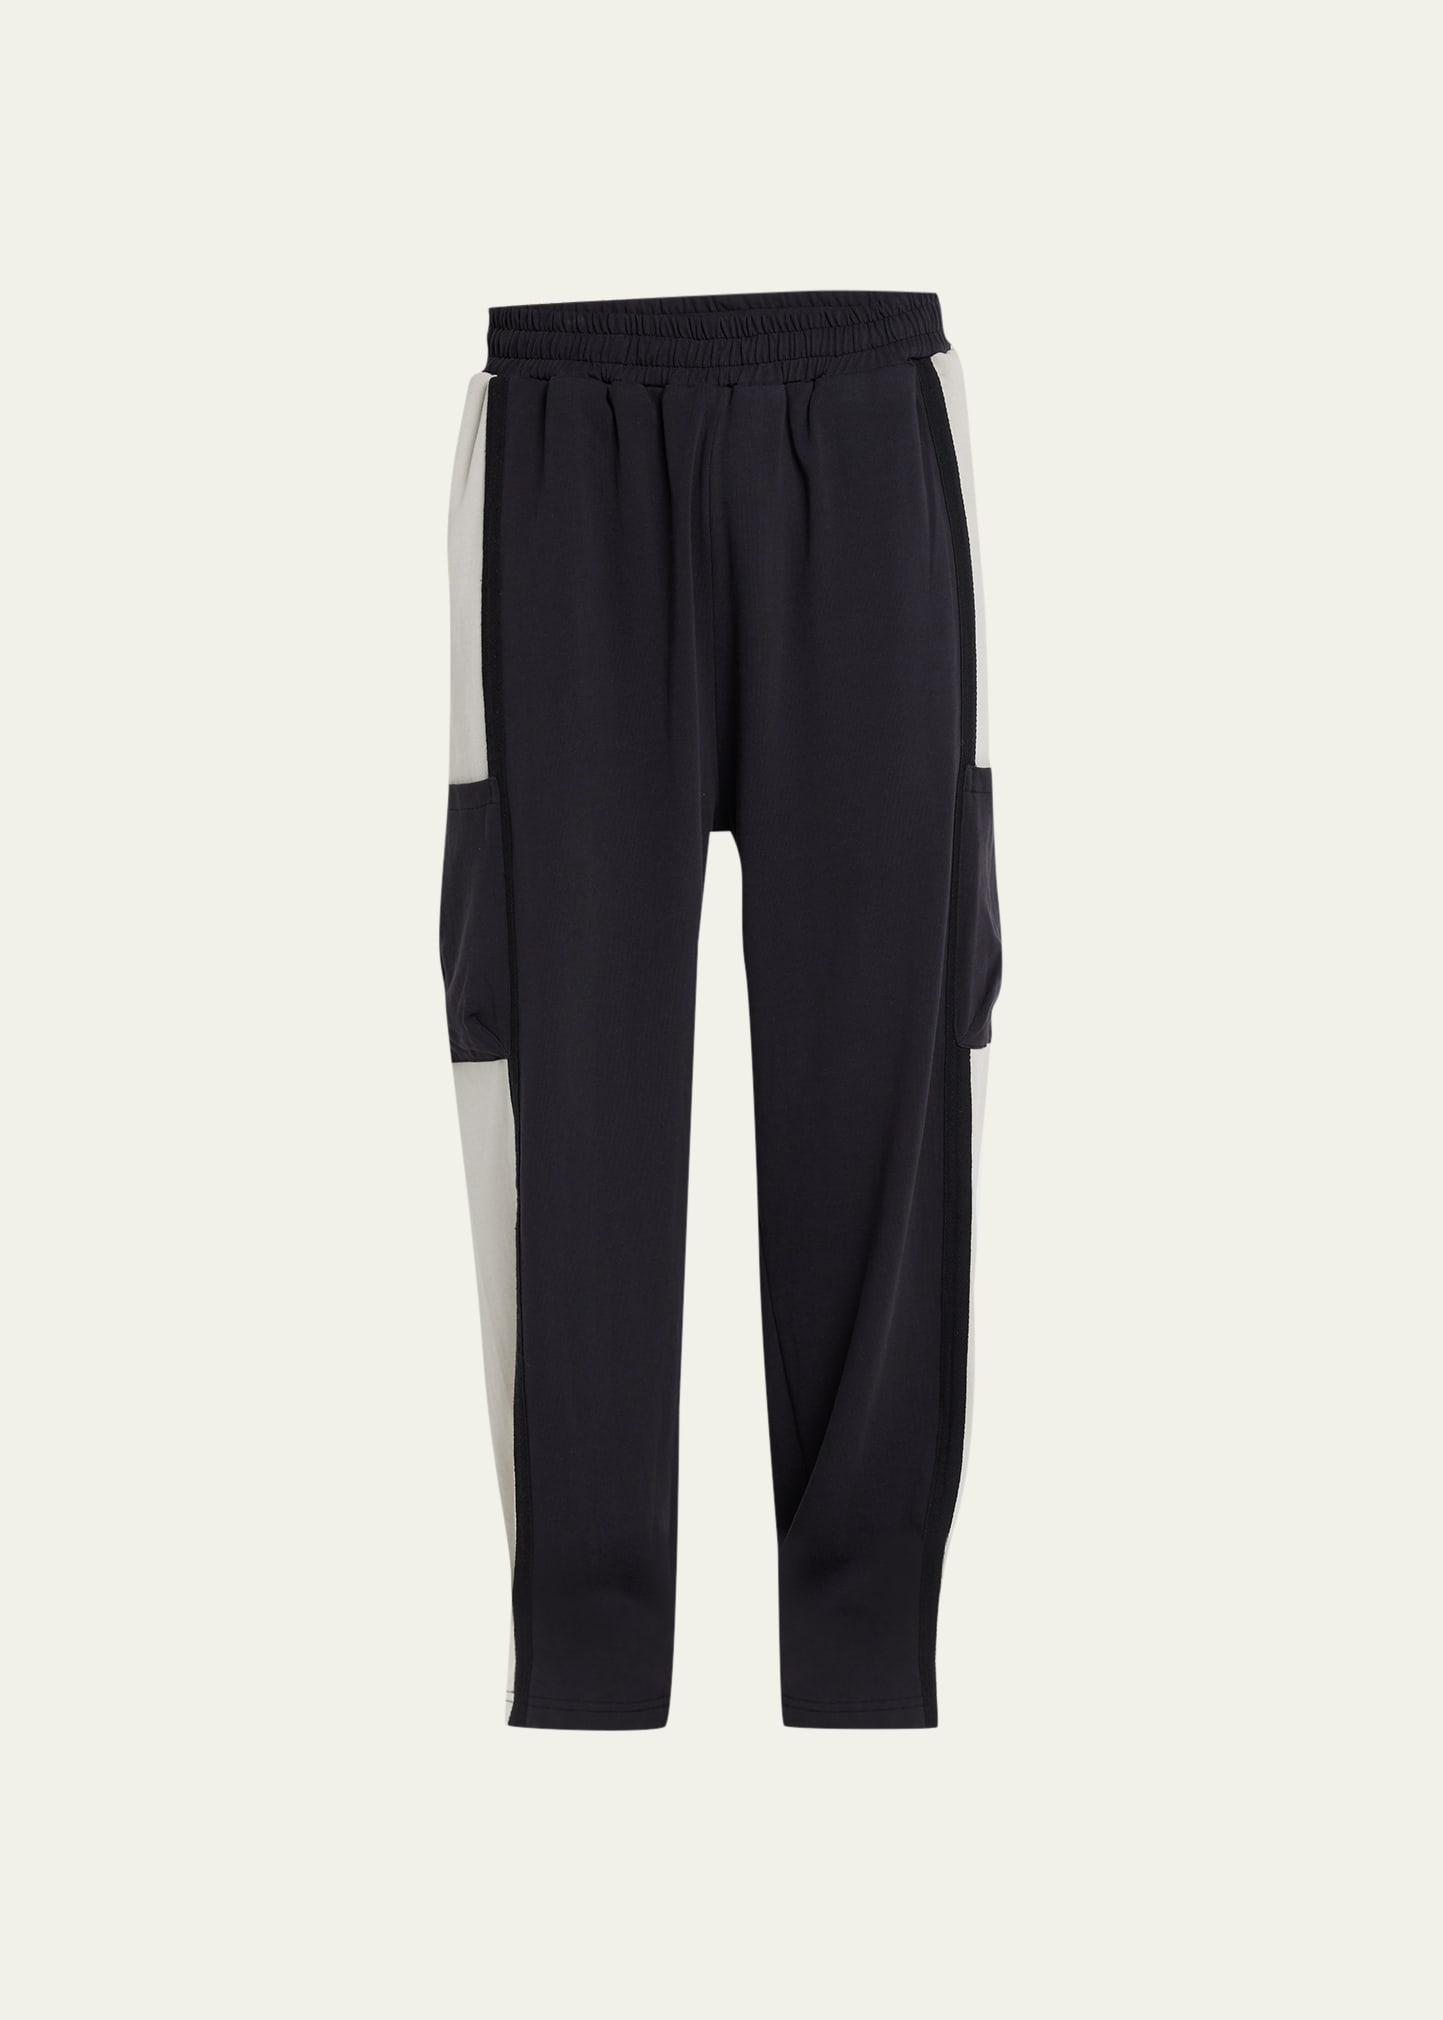 Men's Relaxed Athletic Pants with Side Panels